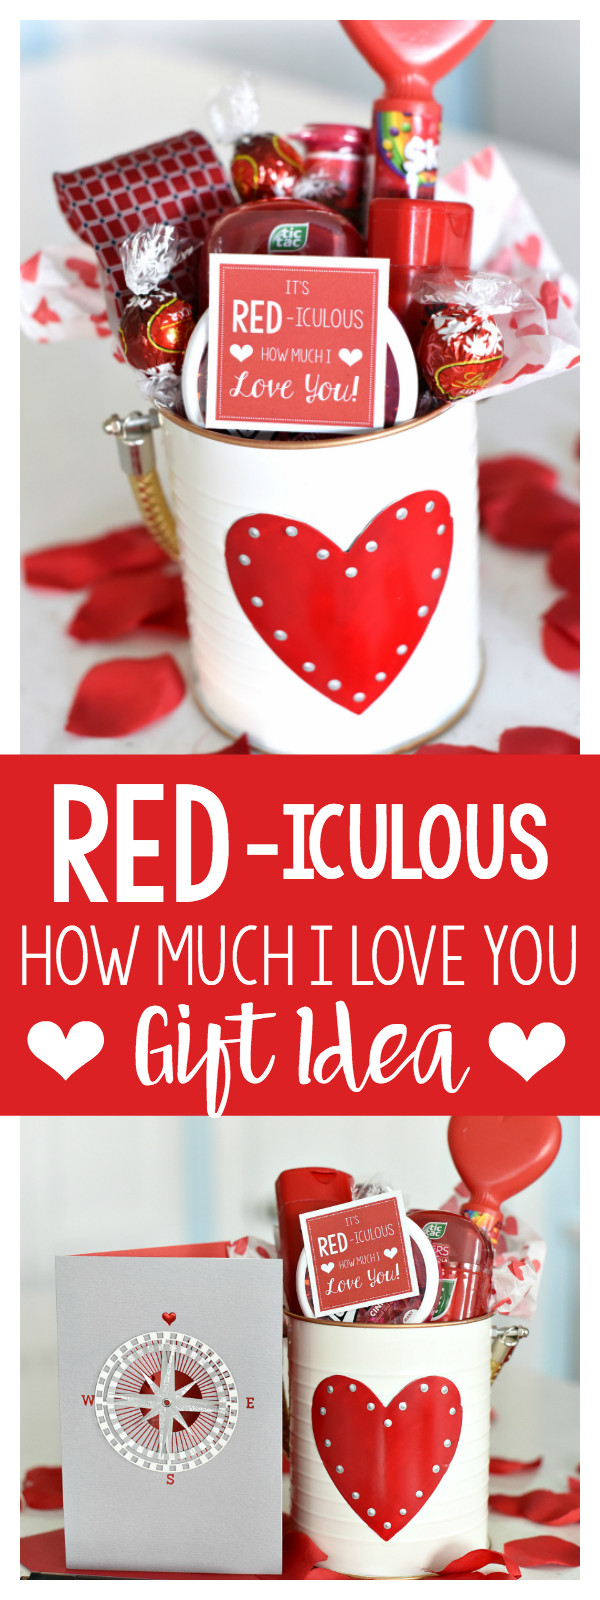 Valentines Gift Ideas Pinterest
 Cute Valentine s Day Gift Idea RED iculous Basket